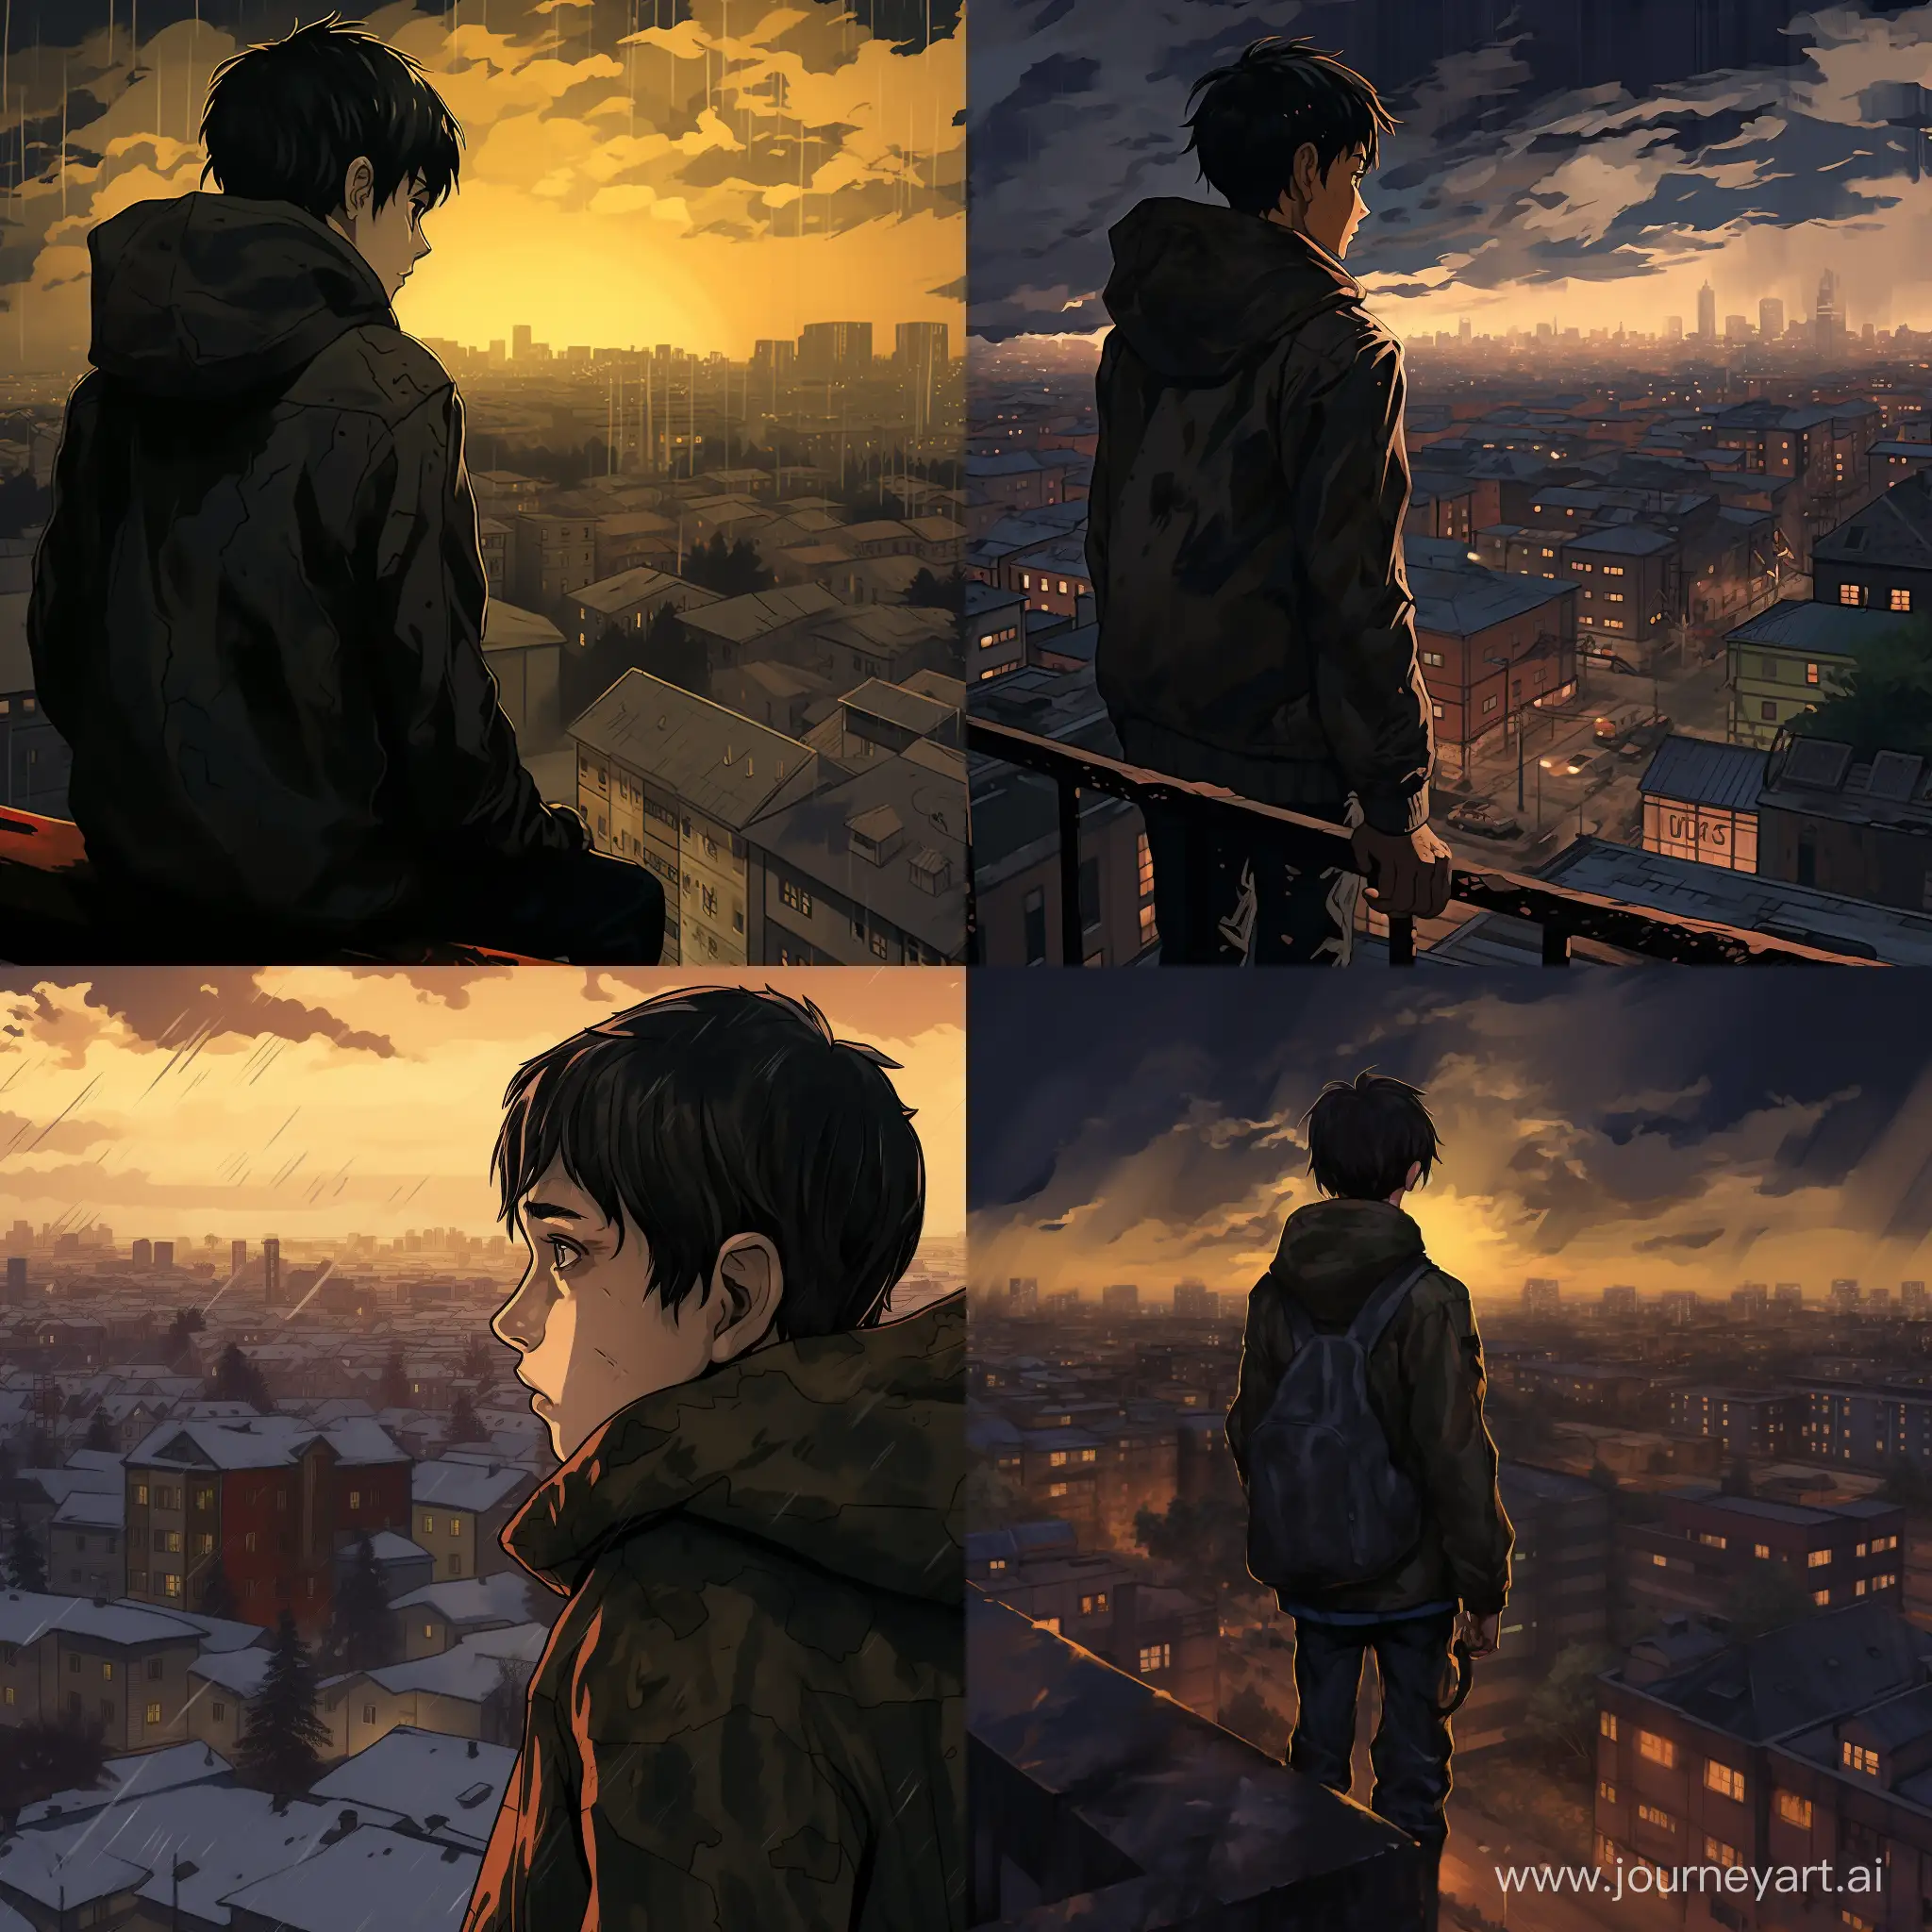 the boy 12 years old, anime style, on the left and right are Russian high-rises houses like in the Soviet Union, standing back, anime, dark grey skies, poverty, high-detailed, it's raining and snowing, sad atmosphere, rooftoop view, night.